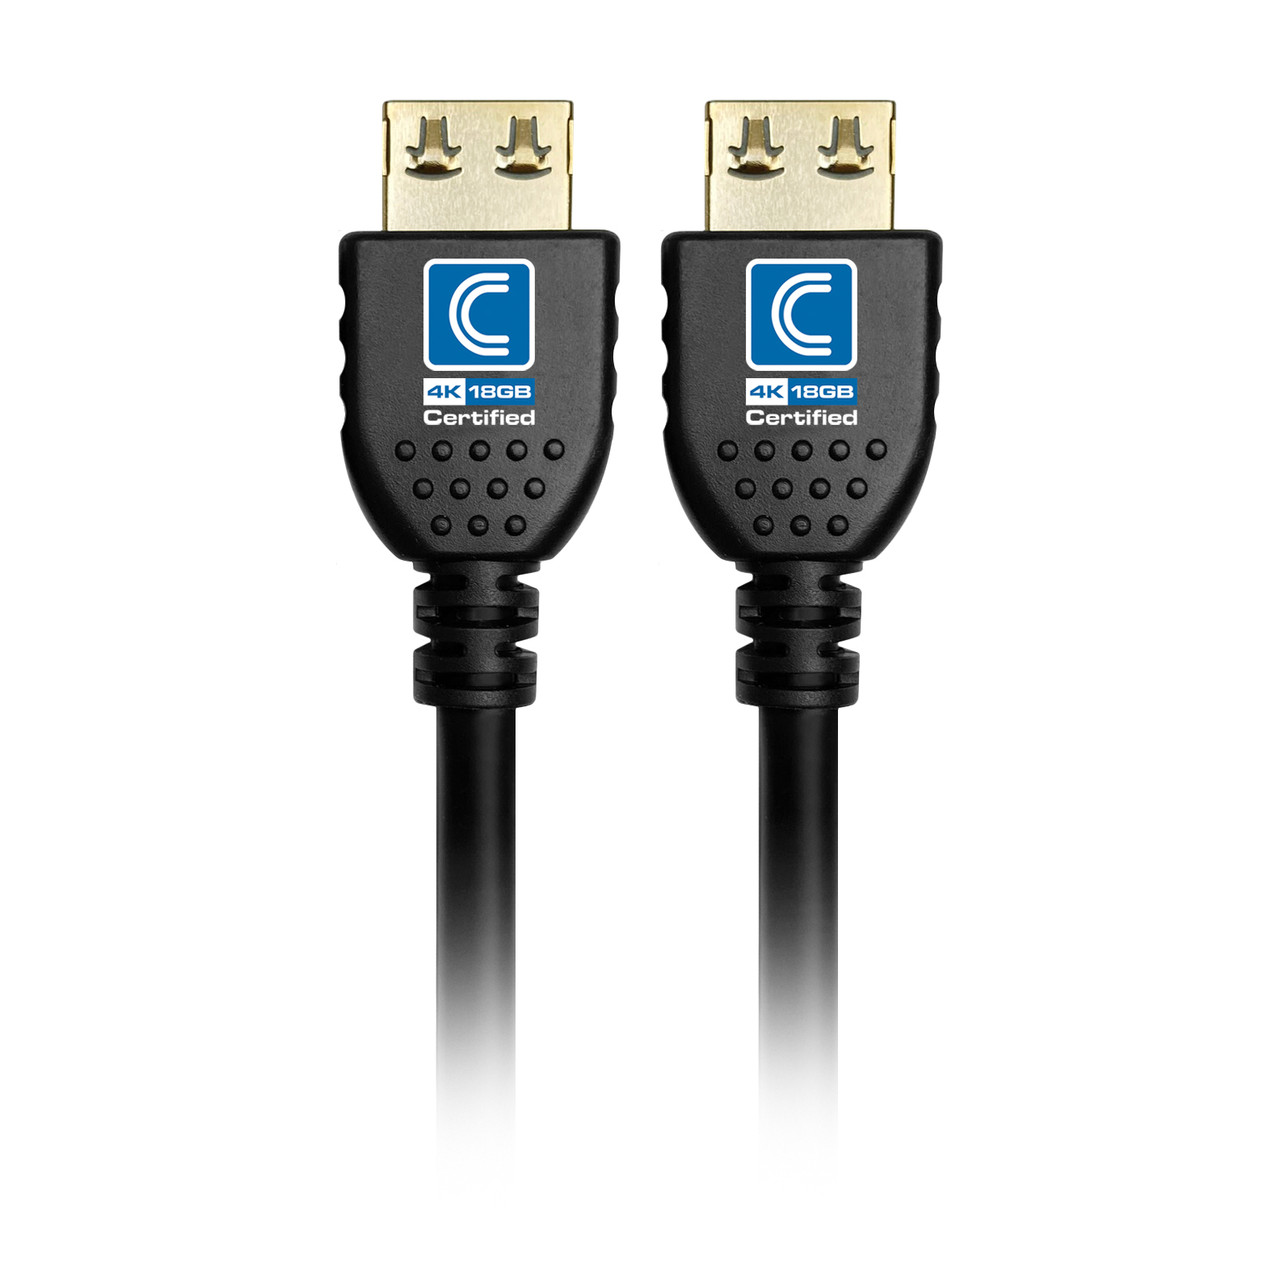 QVS 26 ft. Active Ethernet Gold Plated UltraHD 4K/60Hz 18Gbps Slim HDMI  Cable - Black HF-8M - The Home Depot